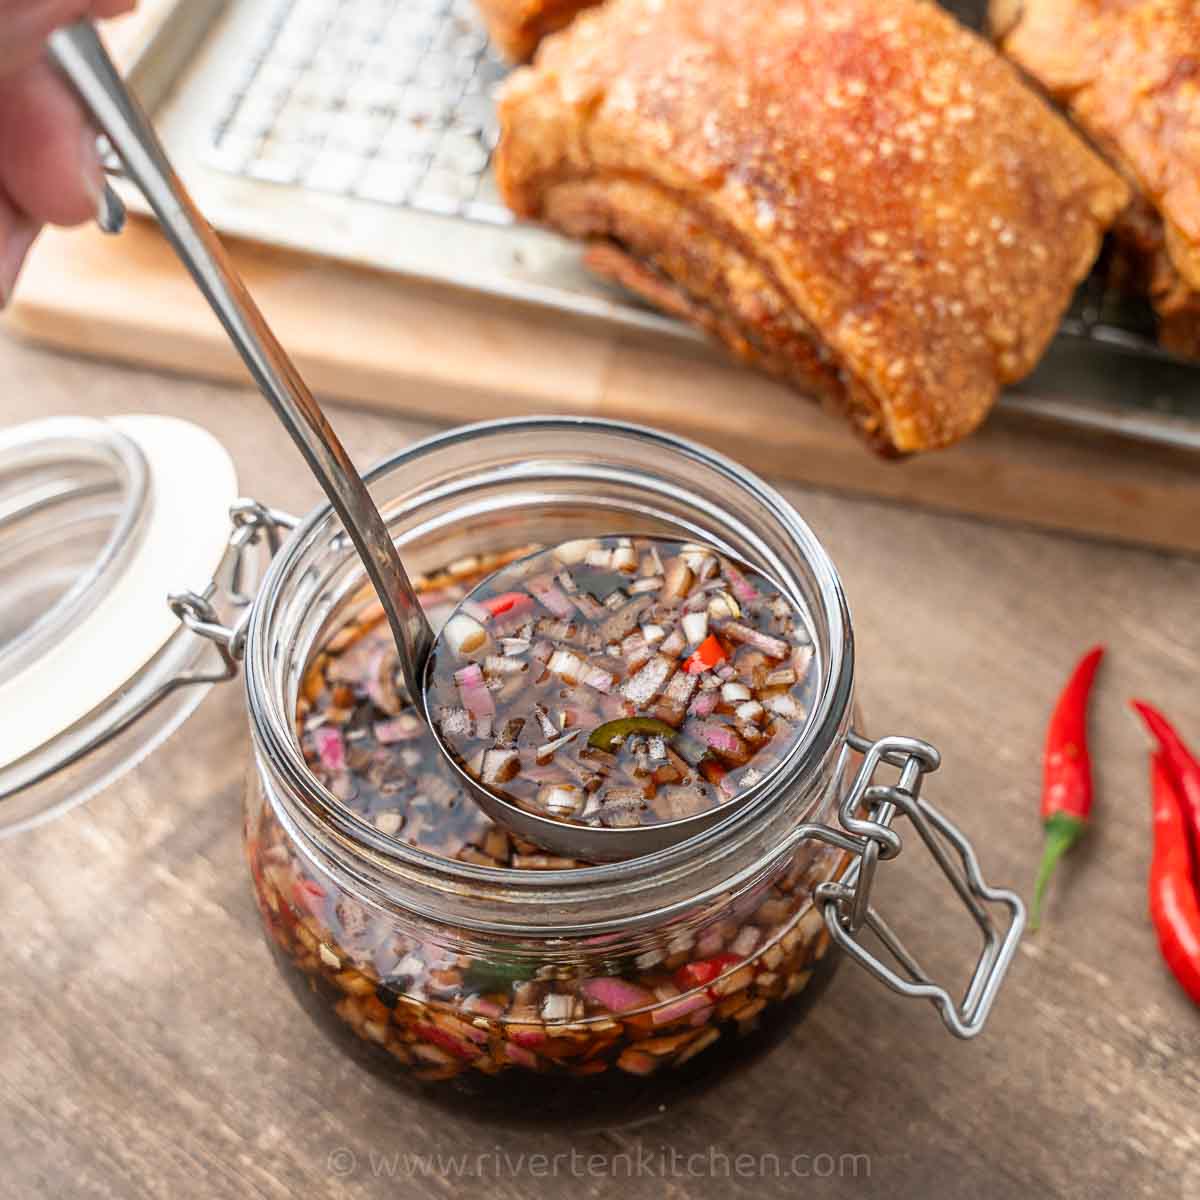 dipping sauce made of soy sauce, vinegar, onion, garlic and chillies.